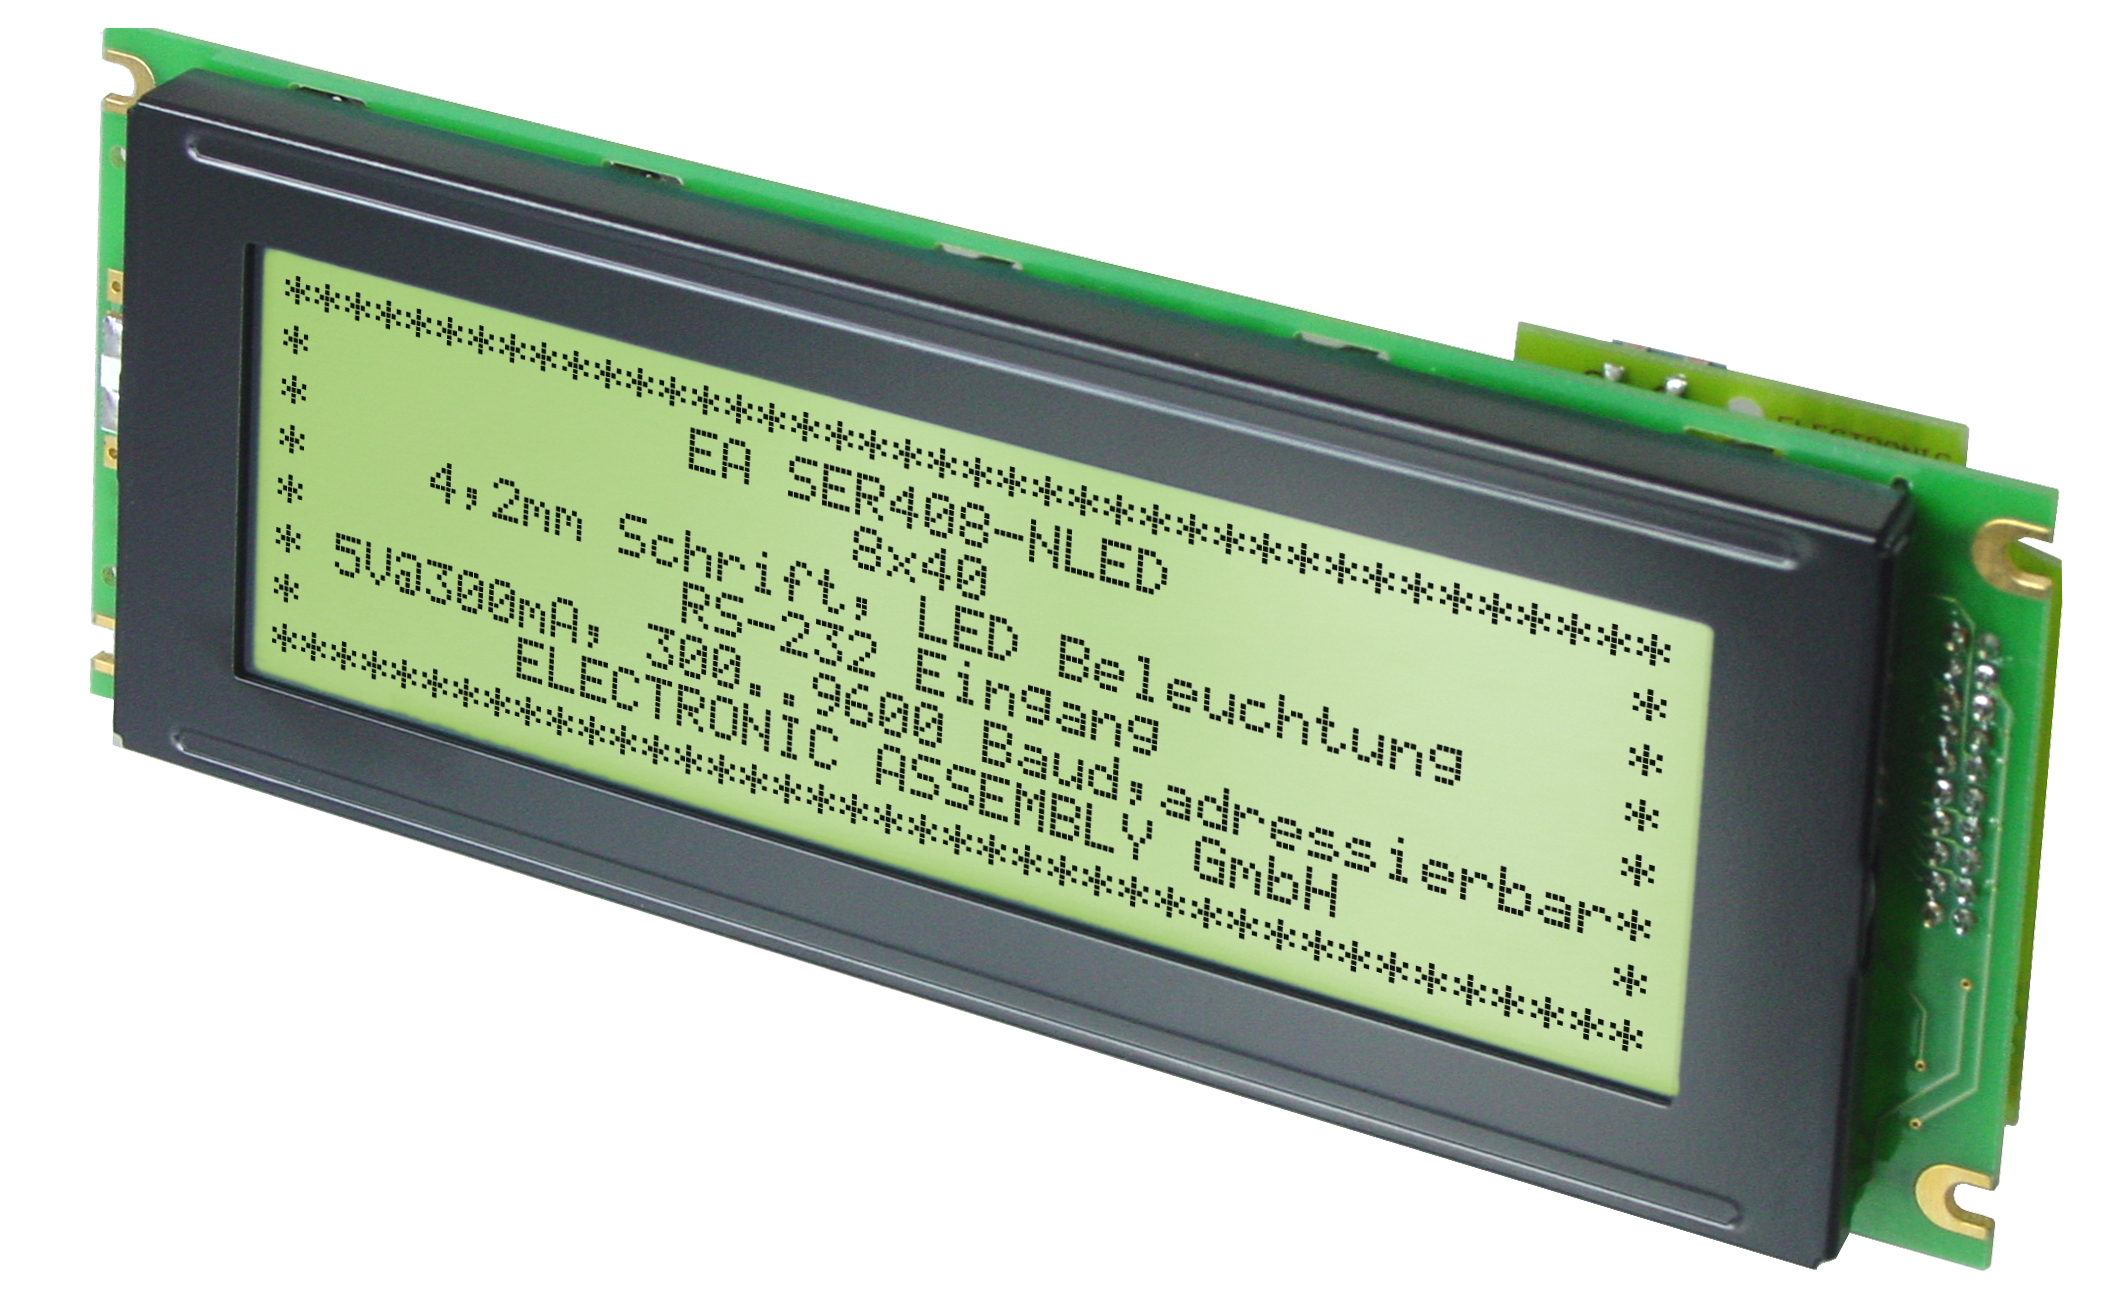 8x40 Serial text Display EA SER408-HNLED